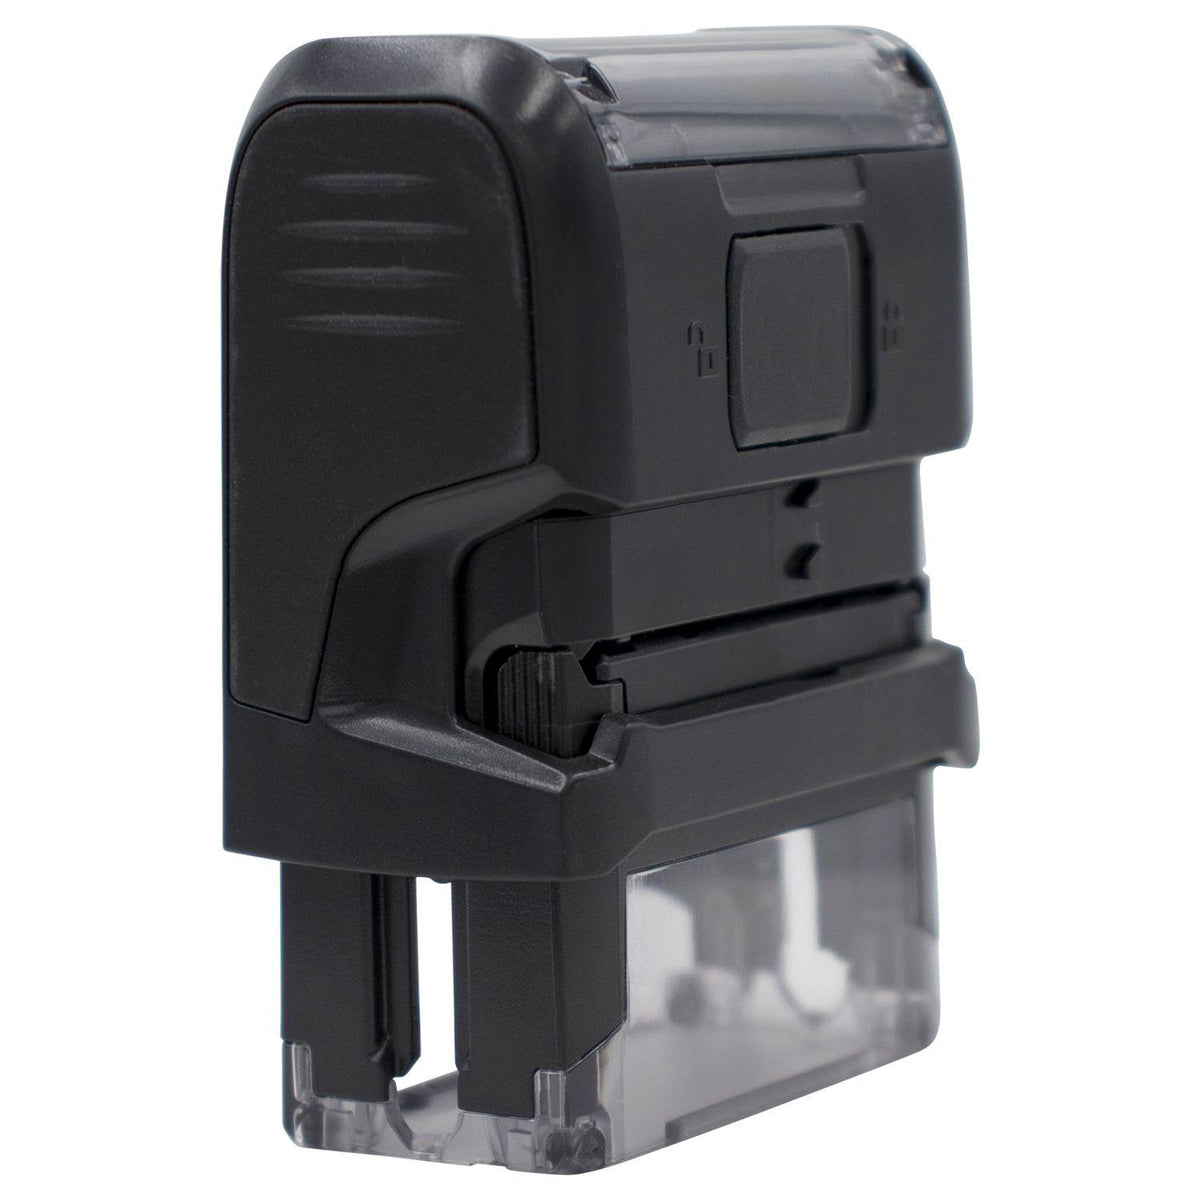 Large Self Inking Clients Copy Stamp Back View